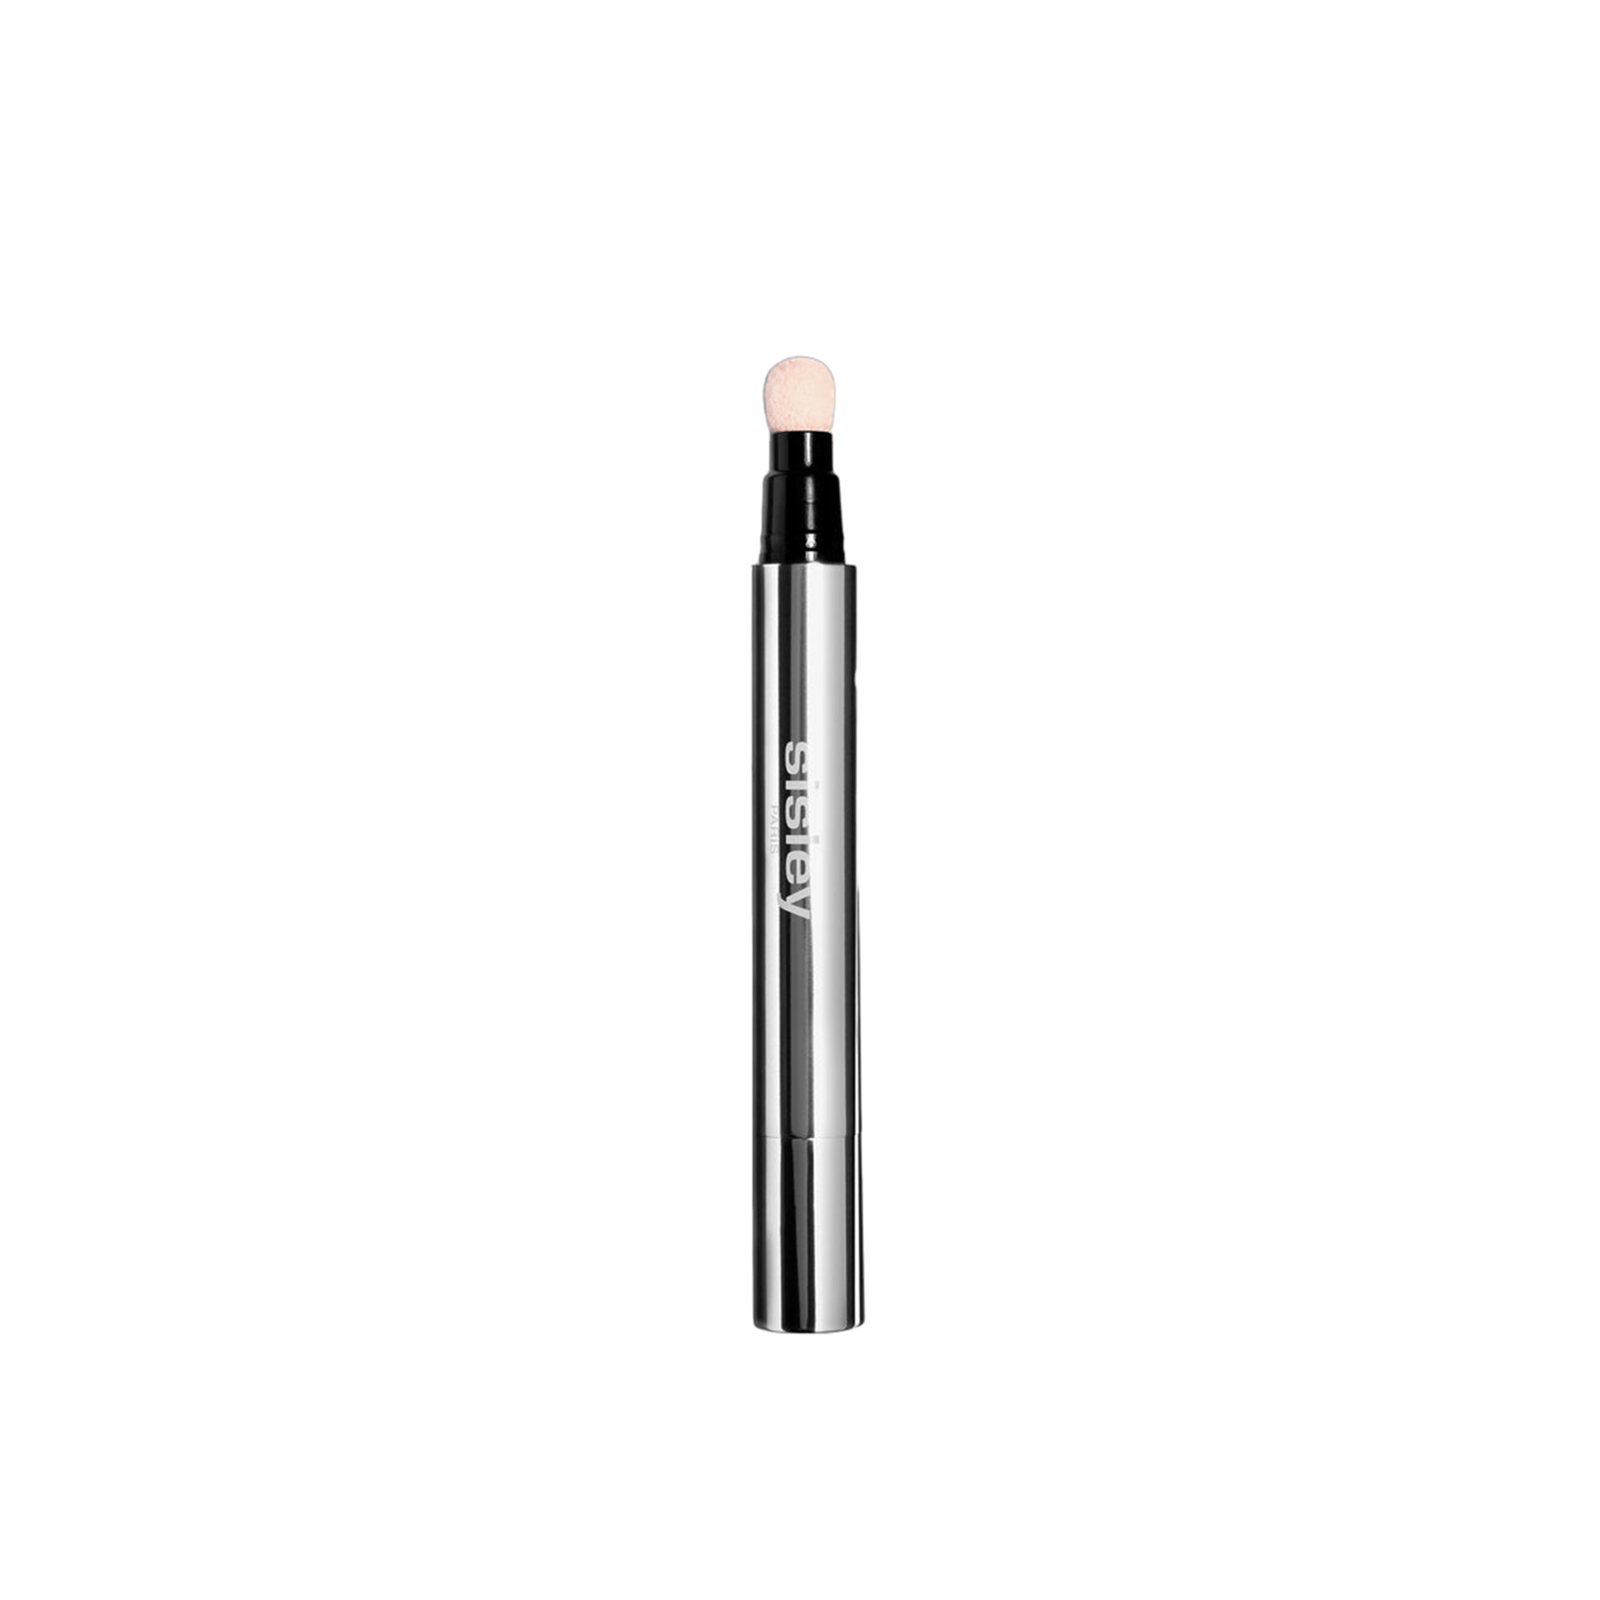 Sisley Paris Stylo Lumière Instant Radiance Booster Pen 1 Pearly Rose 2.5ml (0.08floz)